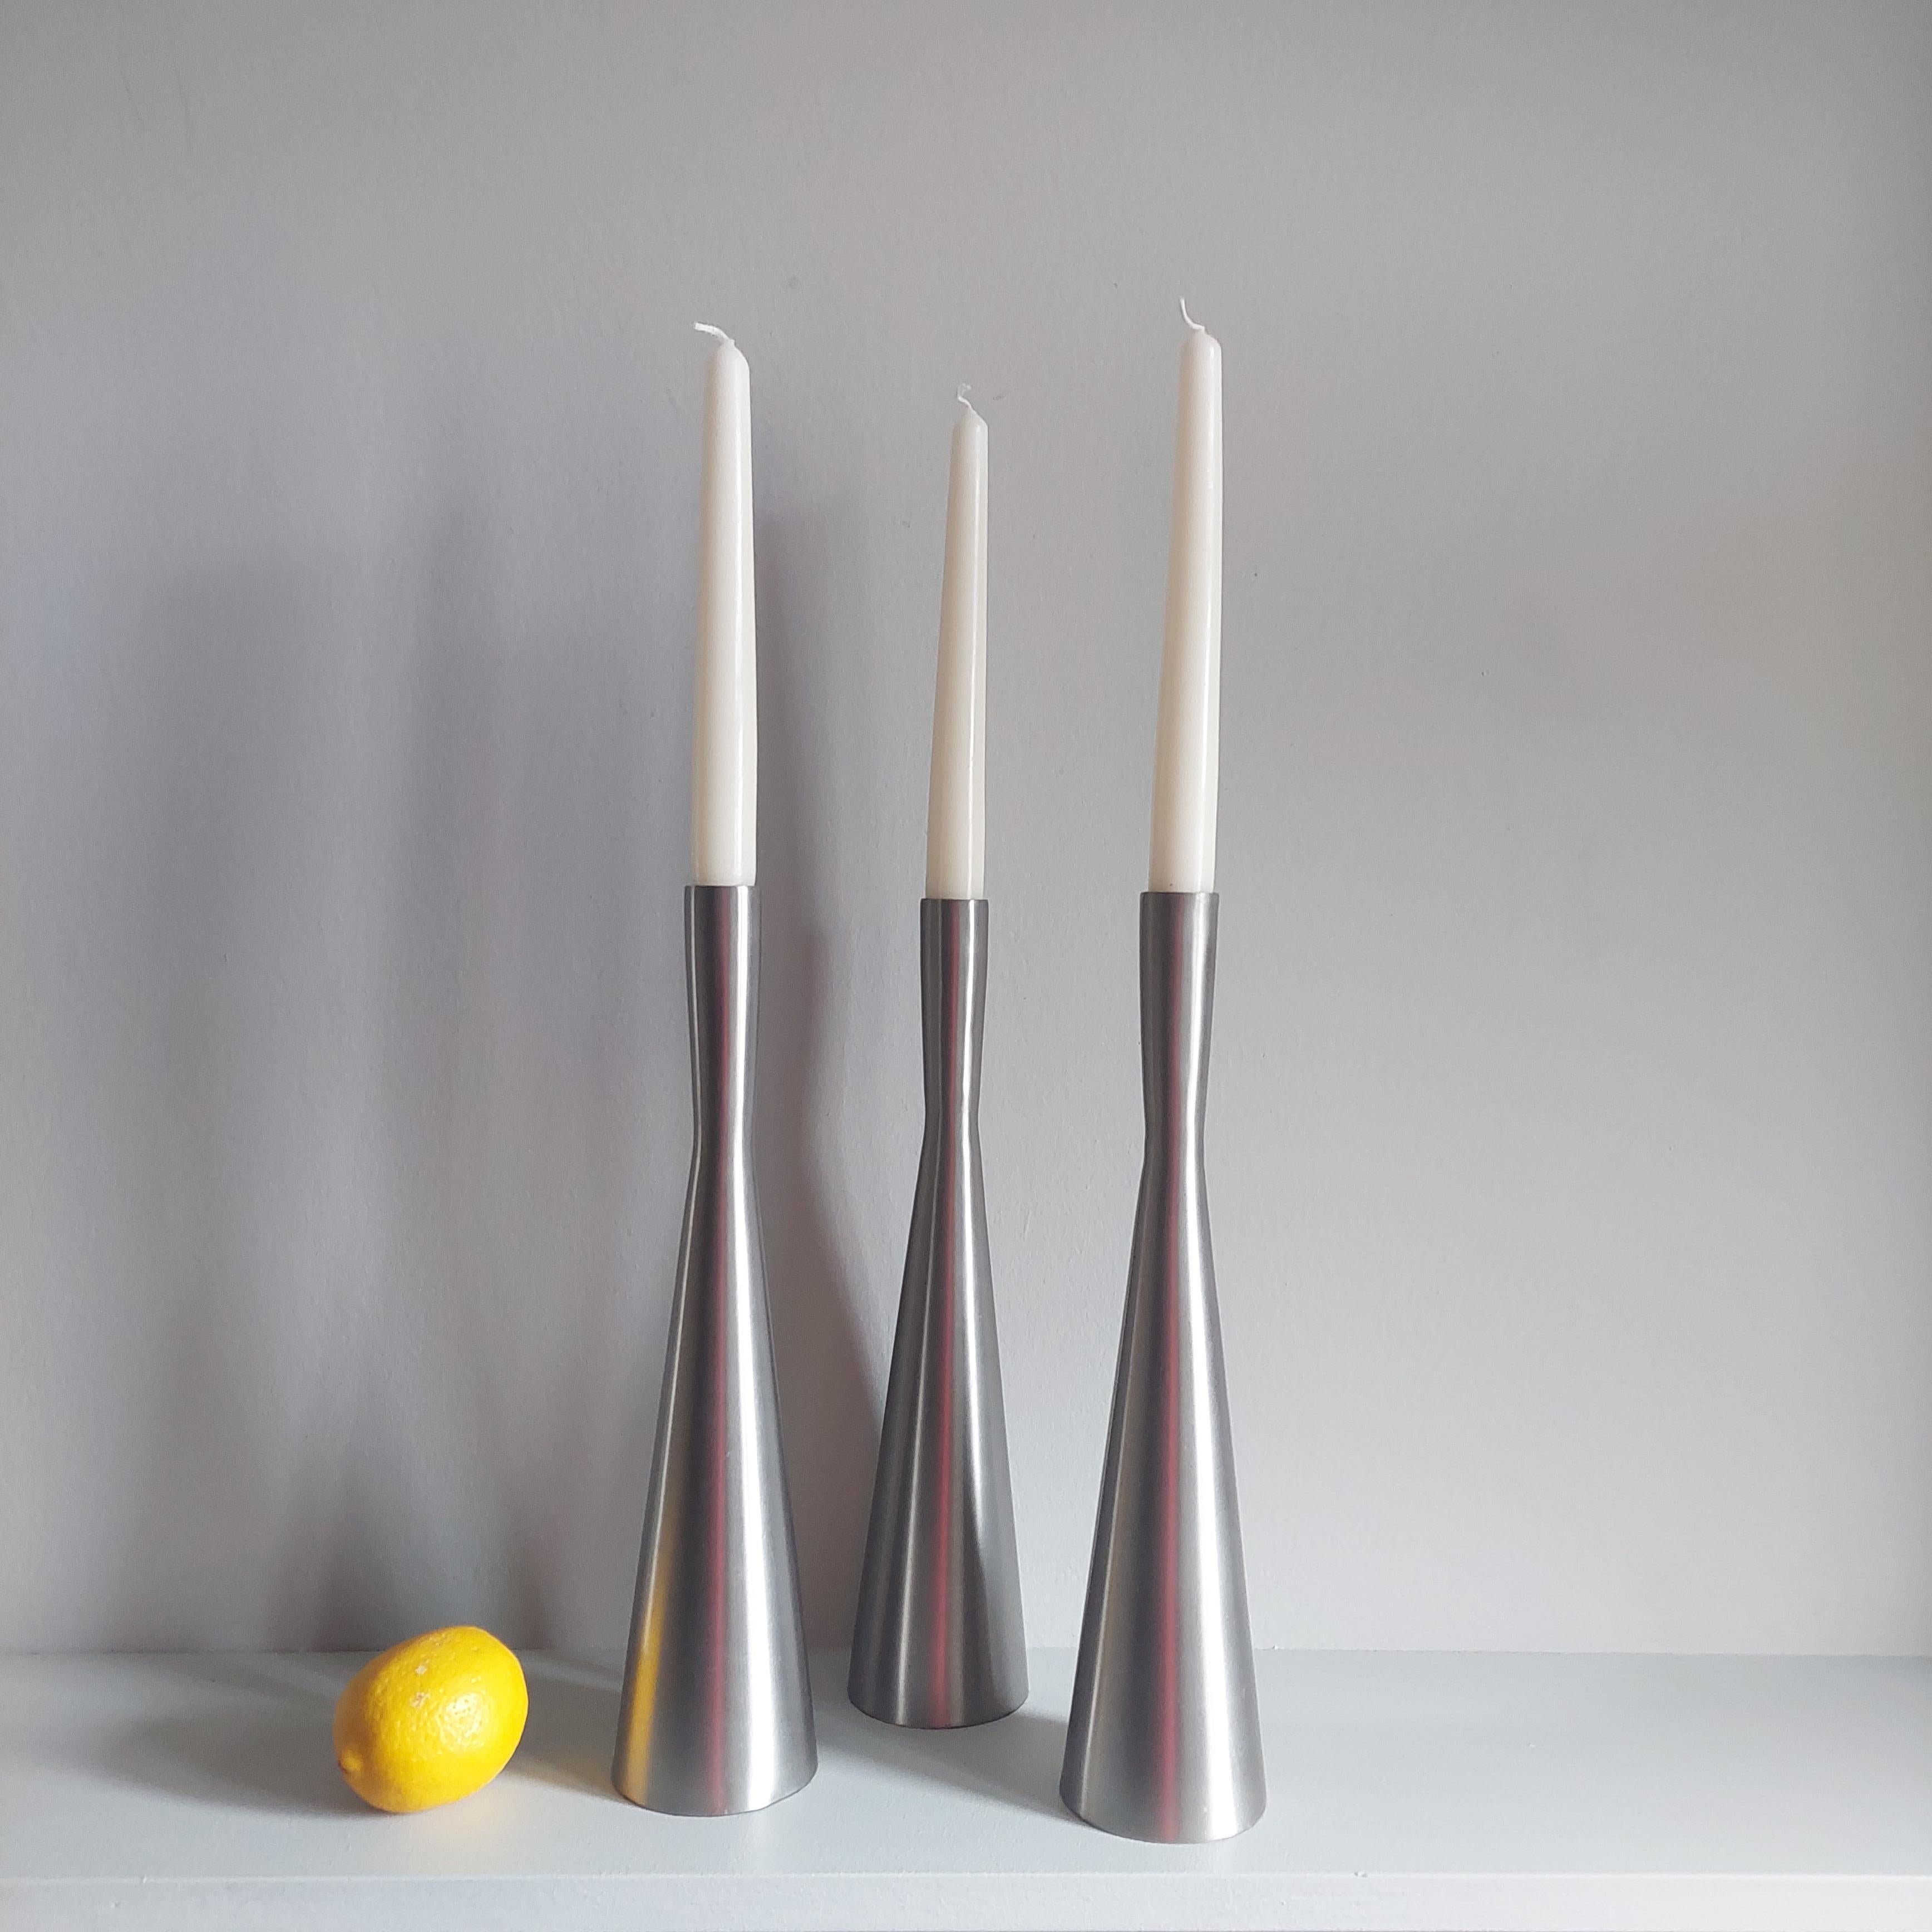 Fantastic set of 3 post modern candlesticks 
Circa 1970s

Made from brushed aluminum.
The minimalist design will sit well on any table or sideboard. 
Priced as trio.

It has a nice conical shape in its lower part, while the last upper tercei is